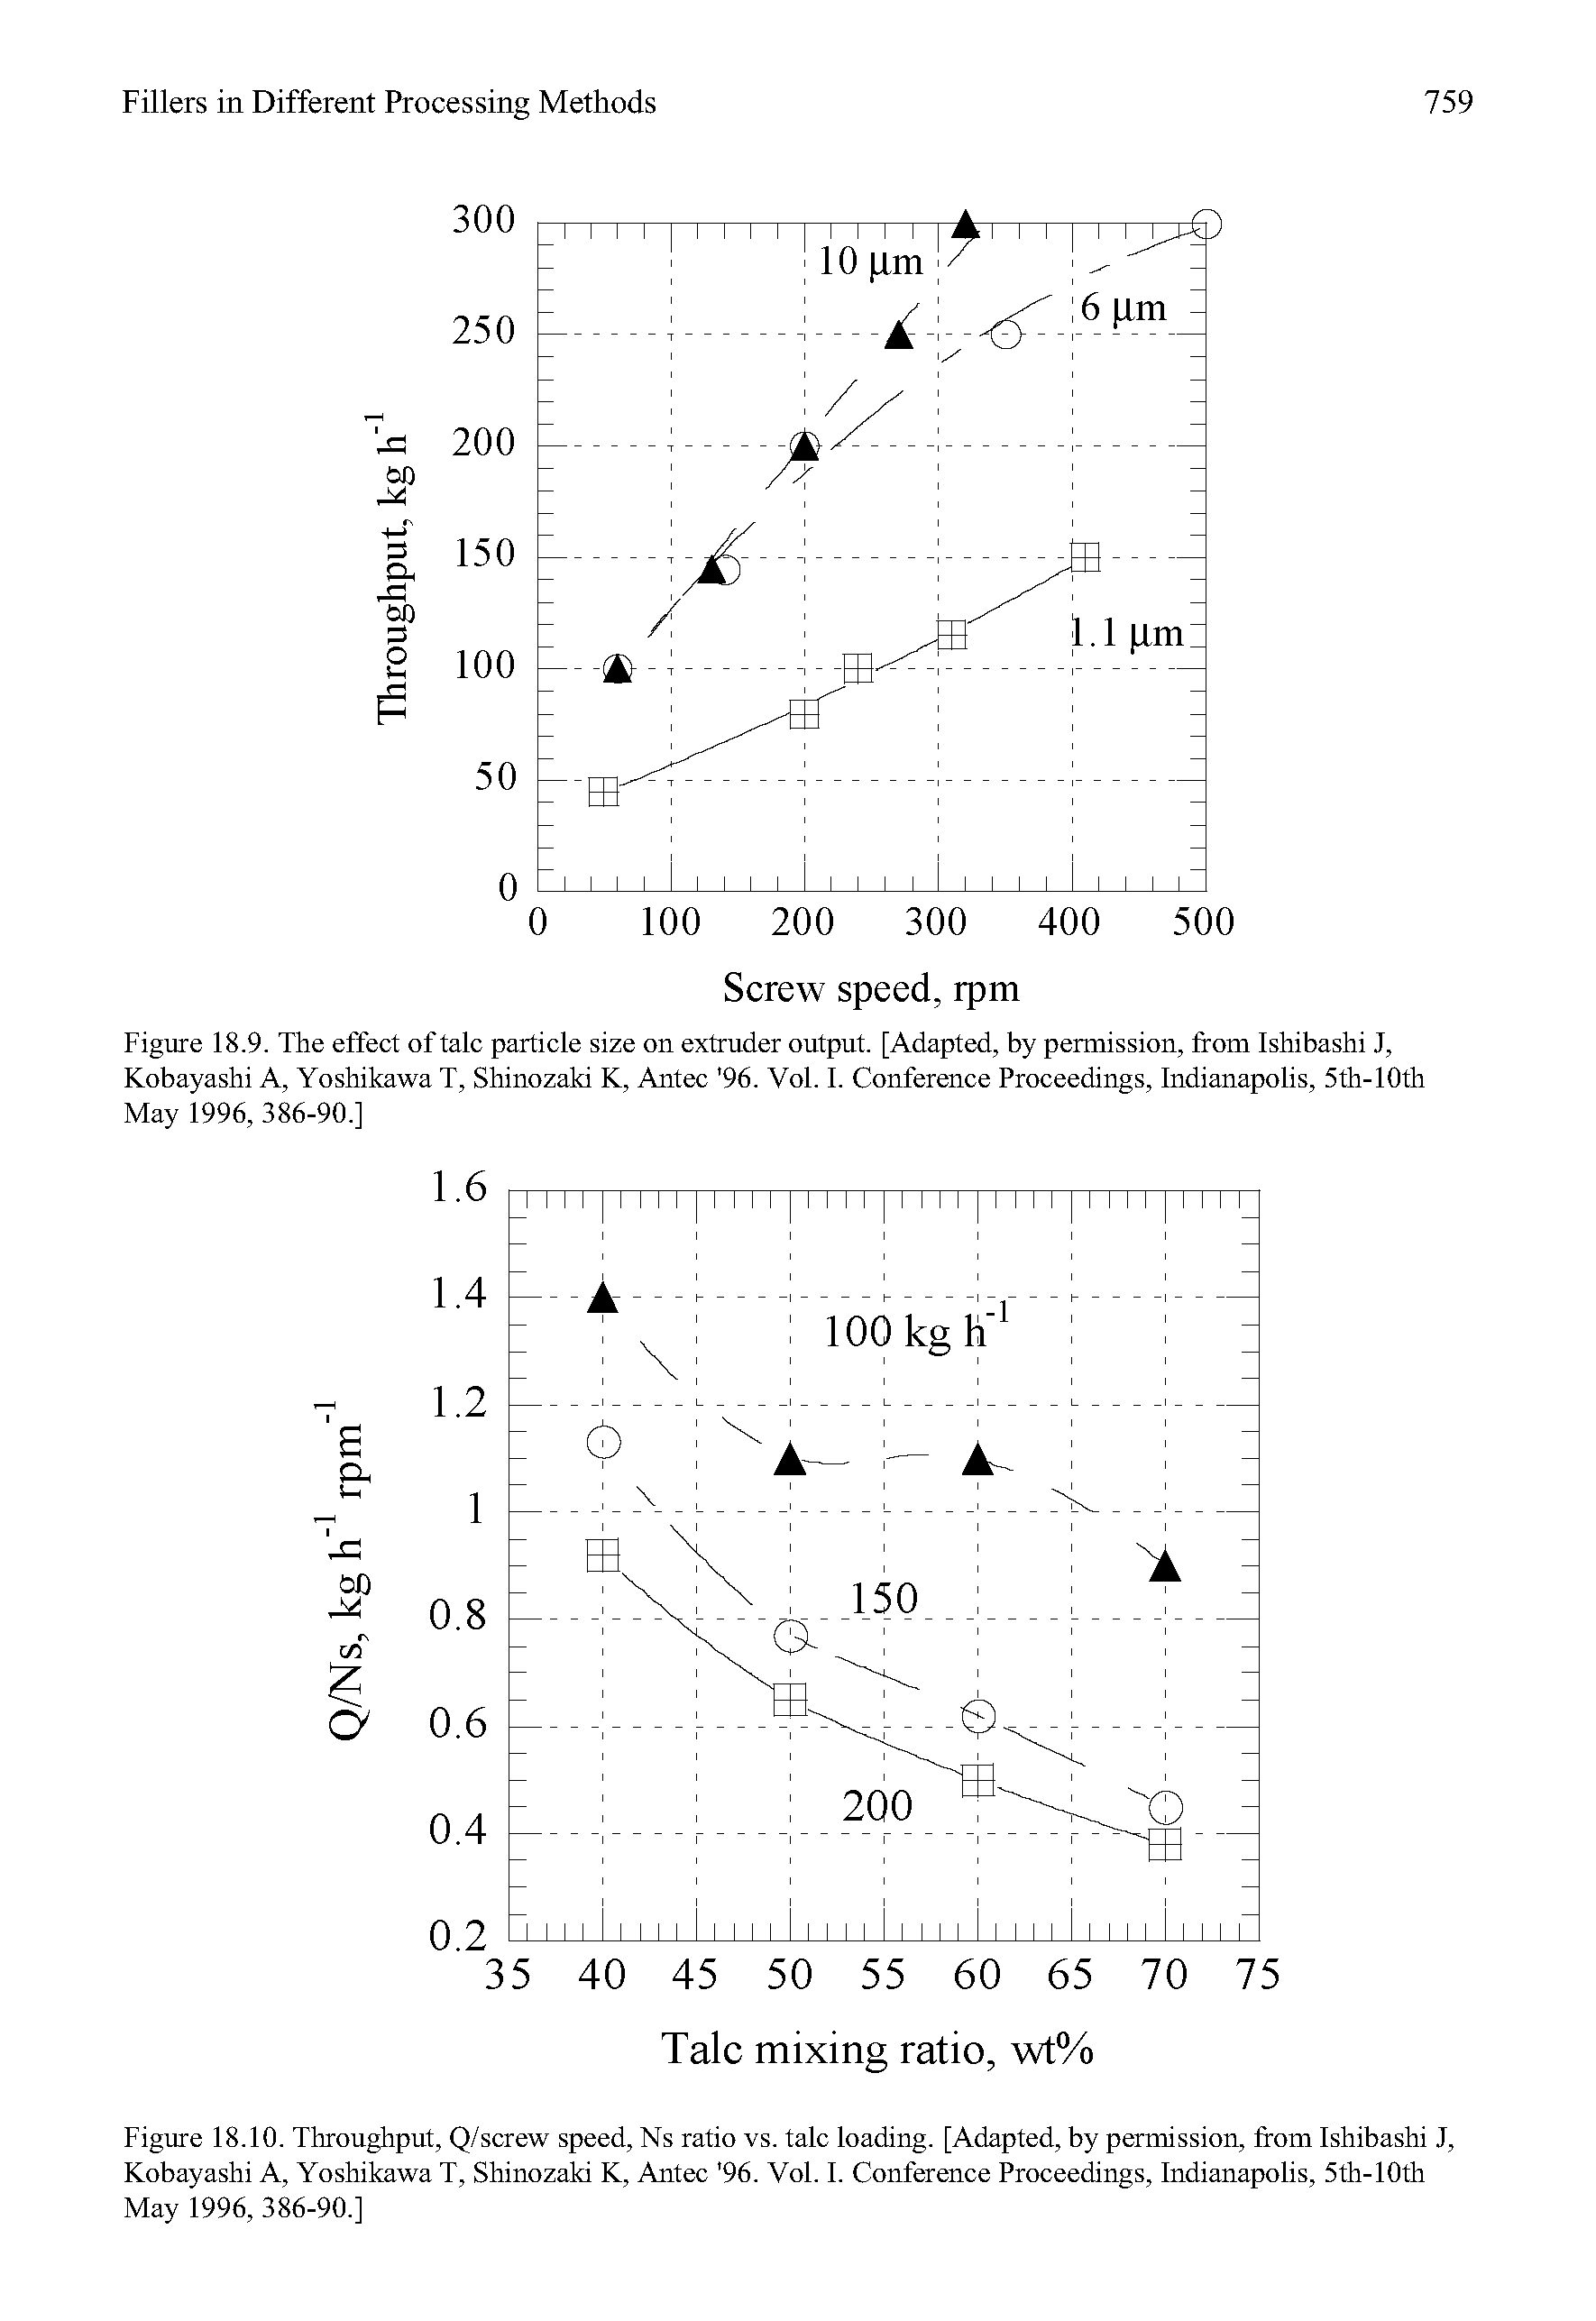 Figure 18.9. The effect of talc particle size on extruder output. [Adapted, by permission, from Ishibashi J, Kobayashi A, Yoshikawa T, Shinozaki K, Antec 96. Vol. I. Conference Proceedings, Indianapolis, 5th-10th May 1996,386-90.]...